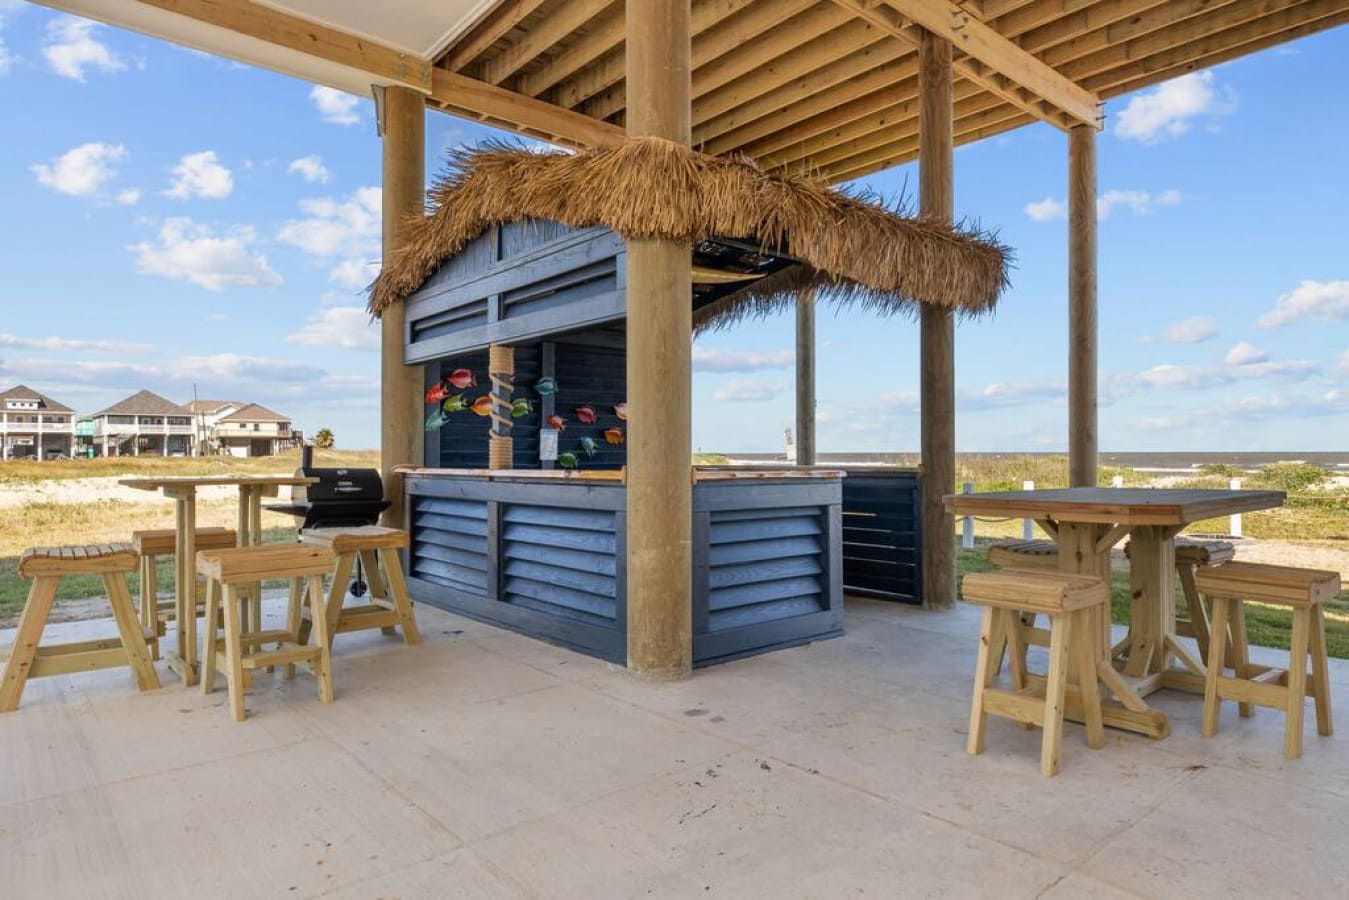 Beachside outdoor bar area in a vacation rental designed by Kindred Design, featuring a thatched roof and bar stools.